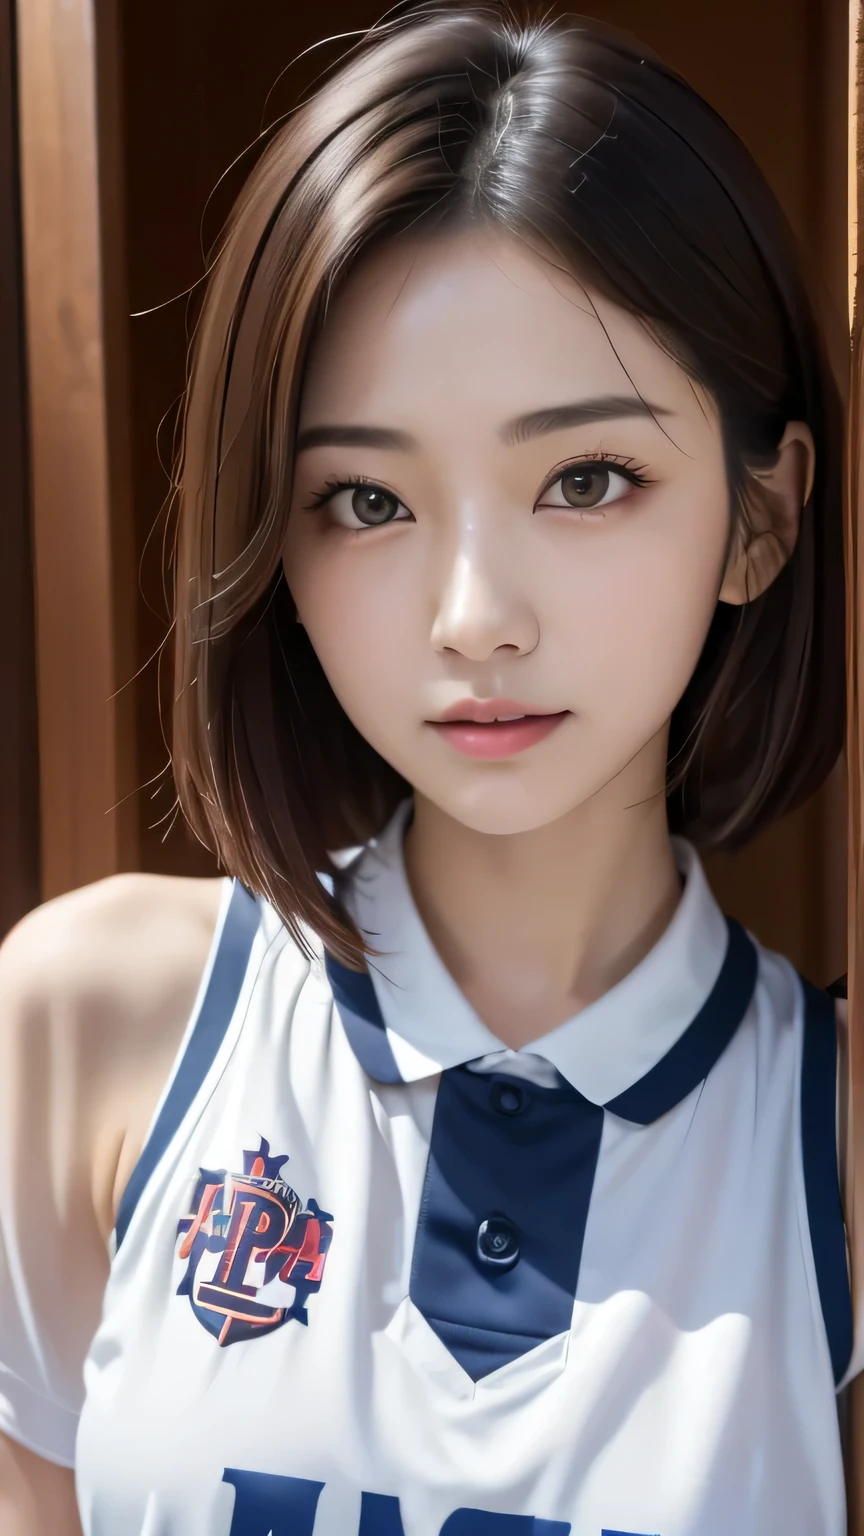 wearing clothes、(photo real:1.4)、(hyper real:1.4)、(real:1.3)、(smooth writing:1.05)、(Improving video lighting quality:0.9)、32k、1GIRL、20 year old girl、realistic lighting、Backlight、facial light、ray tracing、(Brighten:1.2)、(Improve image quality:1.4)、(Top quality realistic textured skin)、fine eyes、detailed face、(tired、sleepy、Satisfaction:0.0)、close up face、basketball uniform:1.3、(Improve body line and mood:1.1)、Shiny skin、actress、korean idol、Nogizaka Idol、Gravure idol、beautiful actress、neat woman、